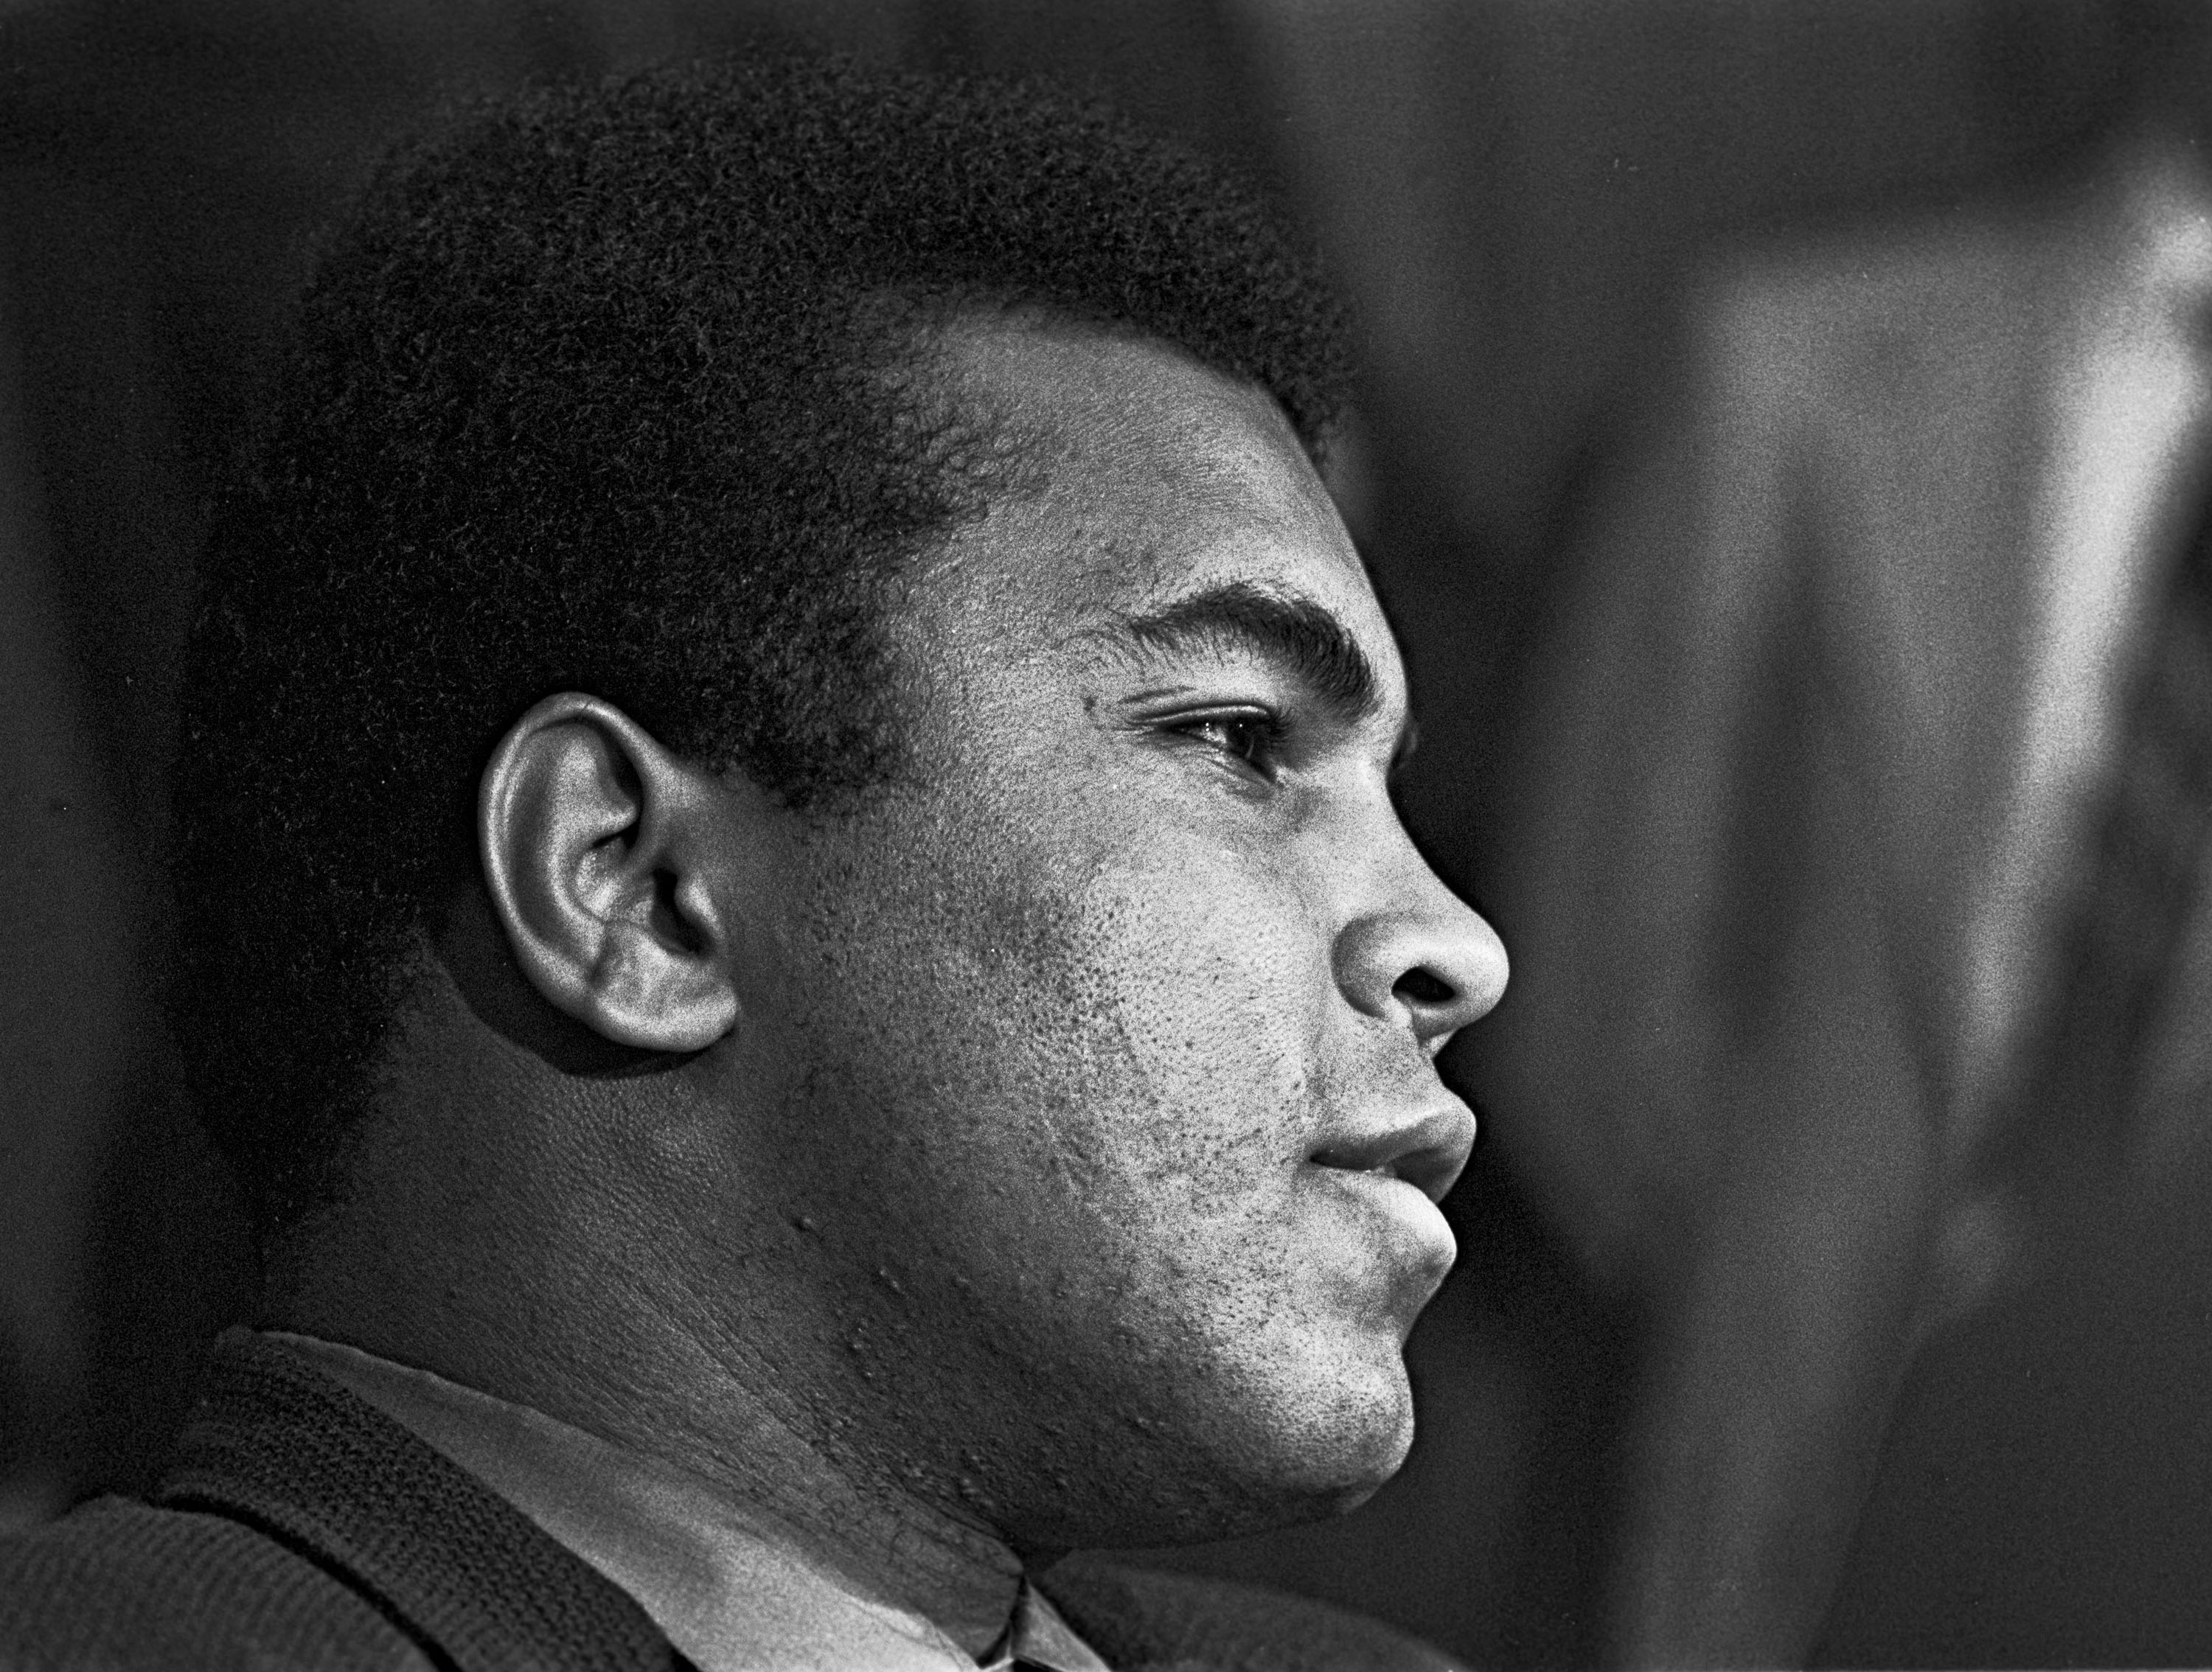 May 18, 1971 - Modesto, California, United States: Sportsmen of Stanislaus Club invited Muhammad Ali to speak in Modesto. In the past, the SOS Club had hosted other boxing greats such as Max Baer, Jack Dempsey, Joe Louis, Rocky Marciano and Joe Frazier. One month later in June of 1971, the Supreme Court ruled in favor of Ali on the issue of his draft evasion conviction, clearing the way for him to box and eventually regain his title. SOS was a male-only organization at that time and charged $5.00 per dinner ticket., Image: 175186988, License: Rights-managed, Restrictions: , Model Release: no, Credit line: Profimedia, Polaris